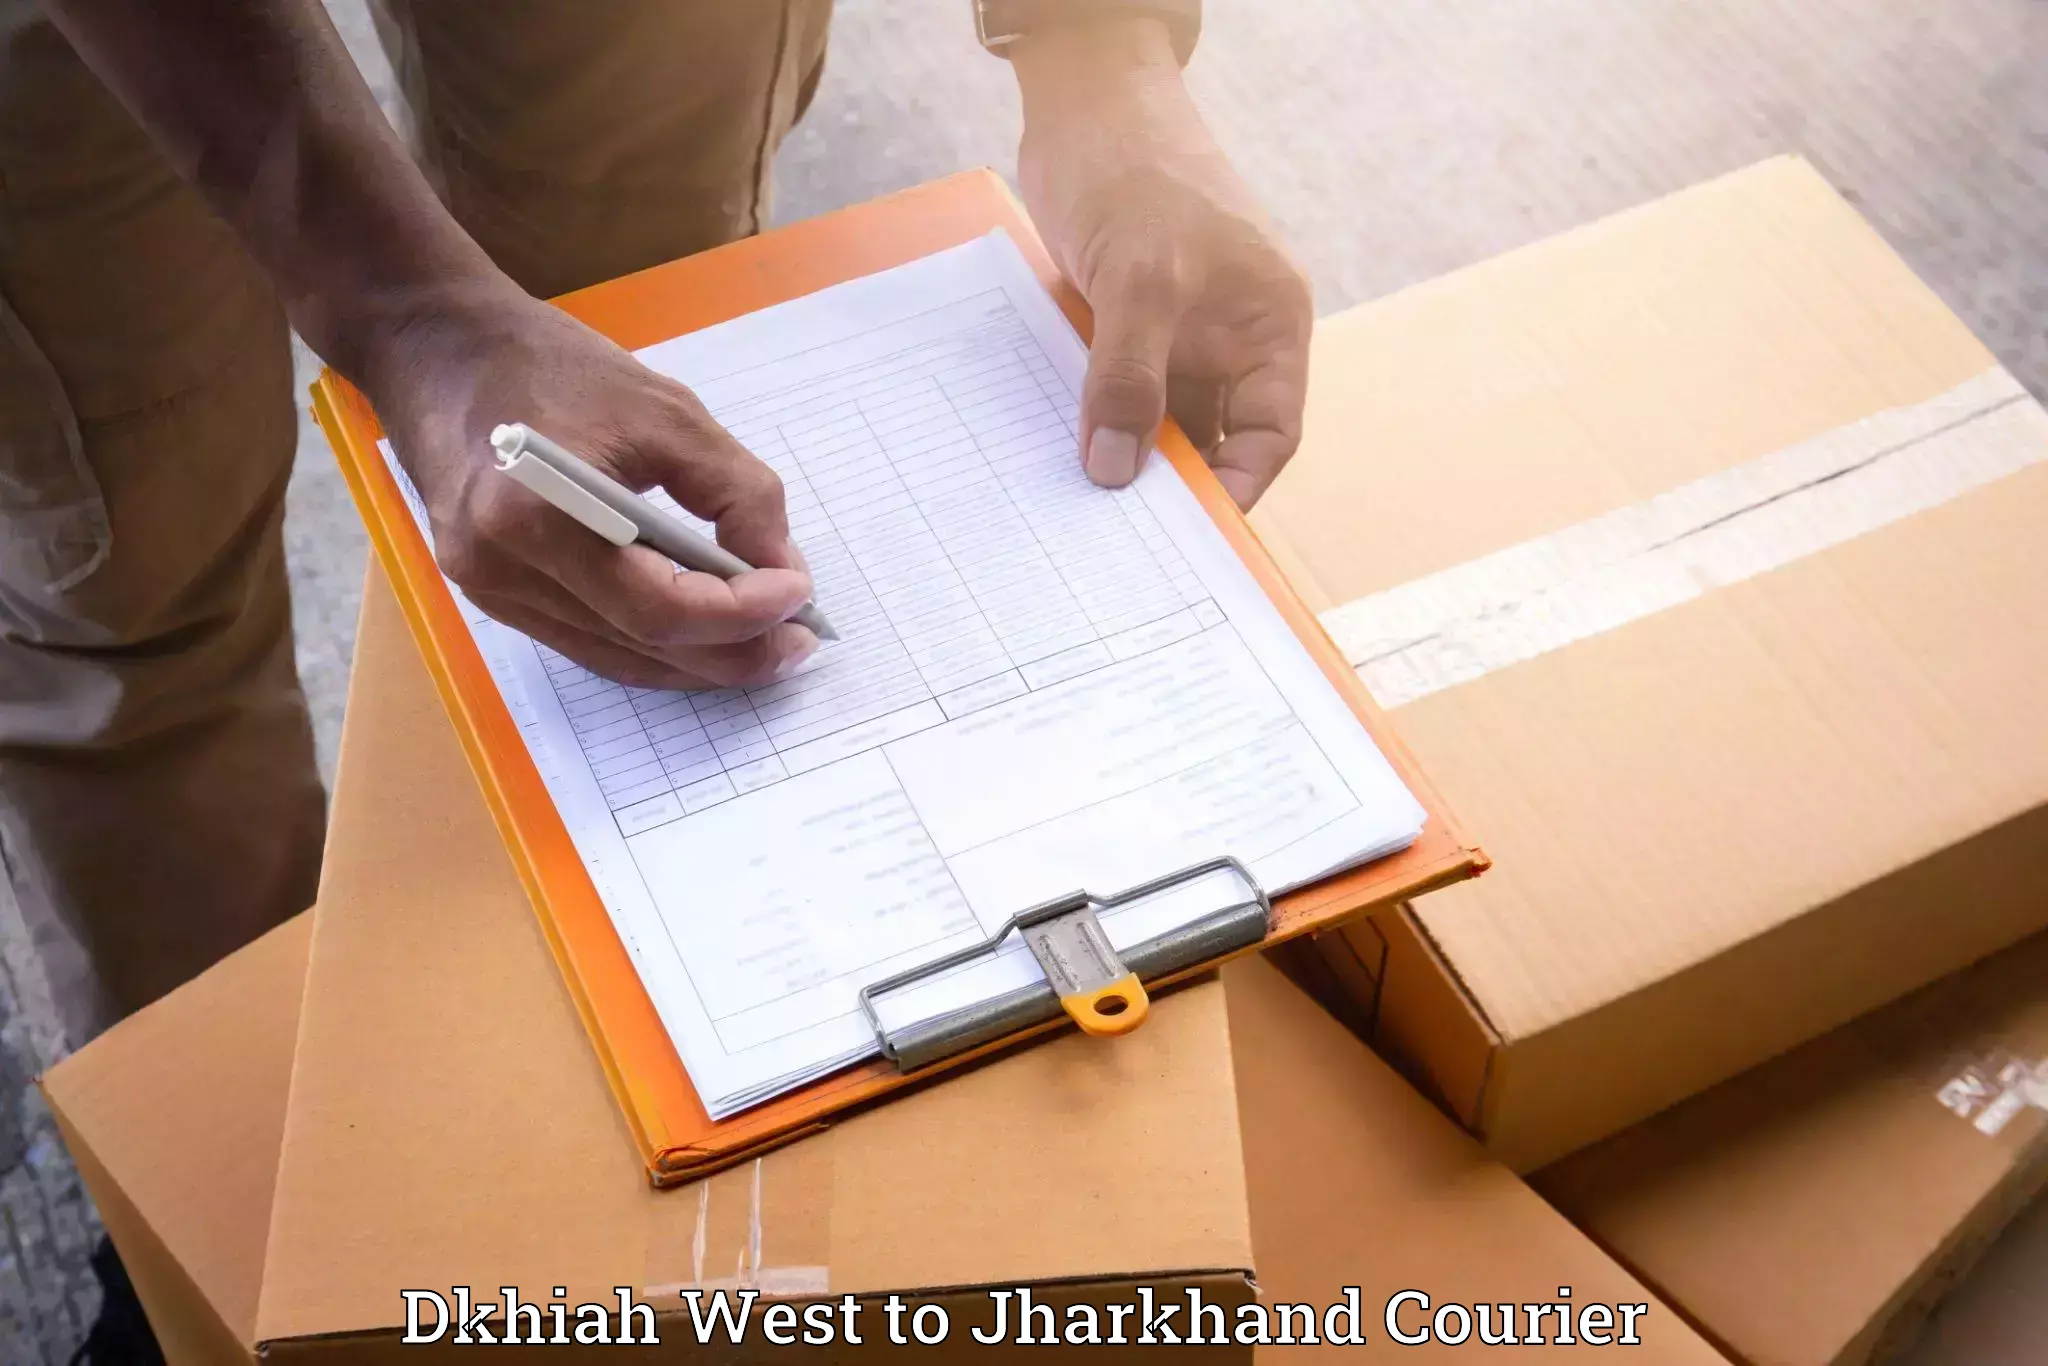 Furniture transport and storage Dkhiah West to Jharkhand